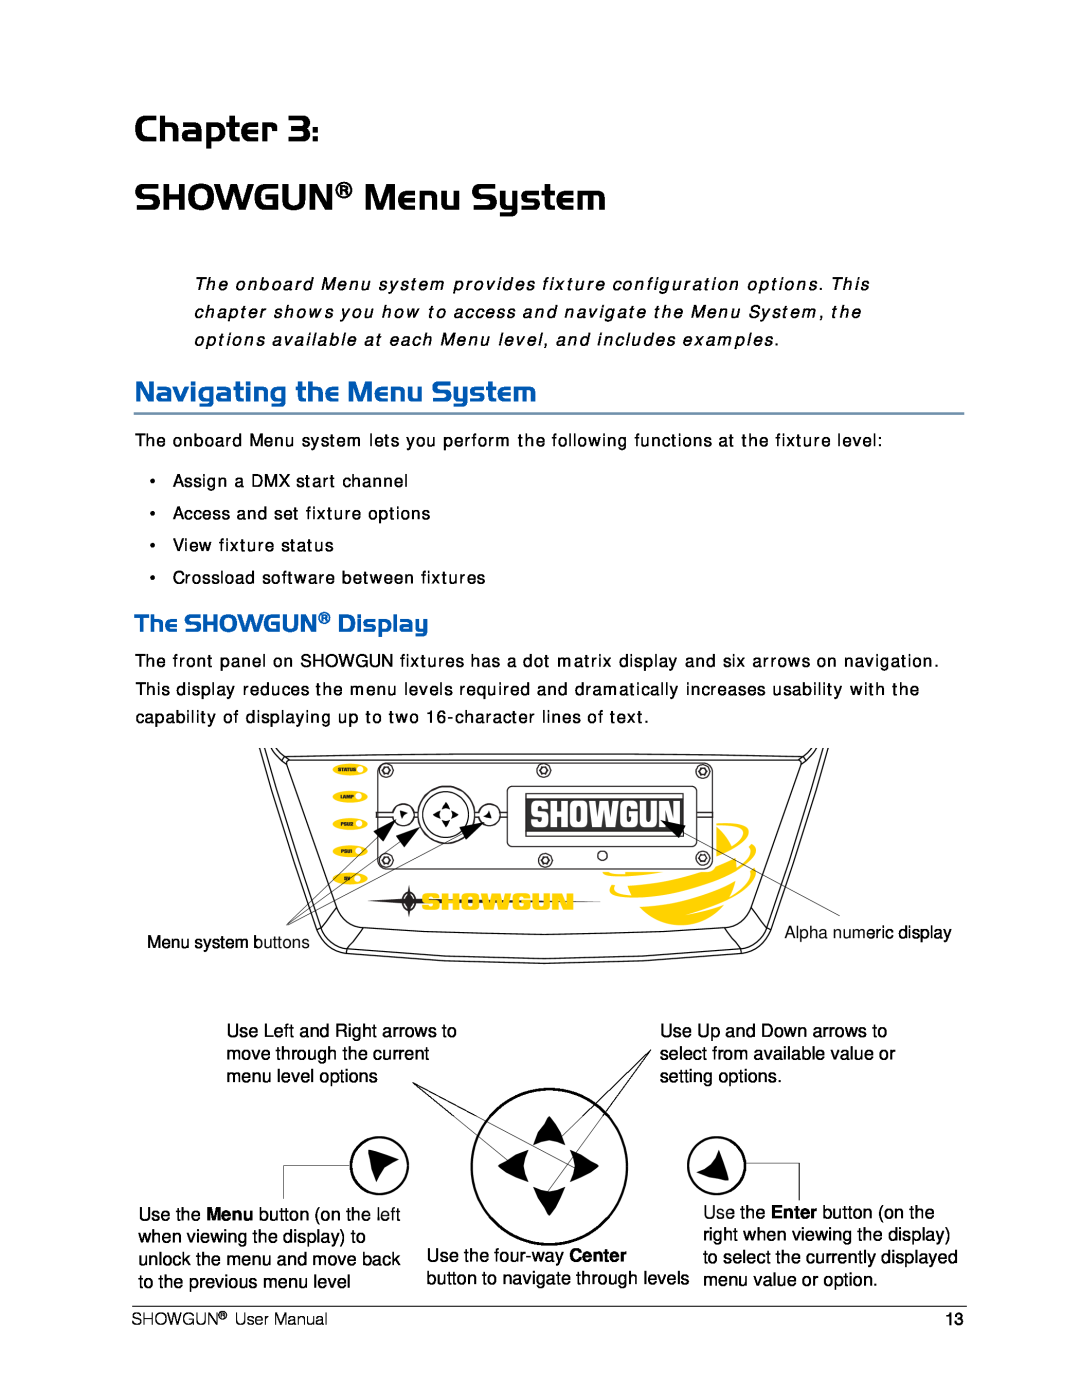 High End Systems user manual Chapter SHOWGUN Menu System, Navigating the Menu System, The SHOWGUN Display 